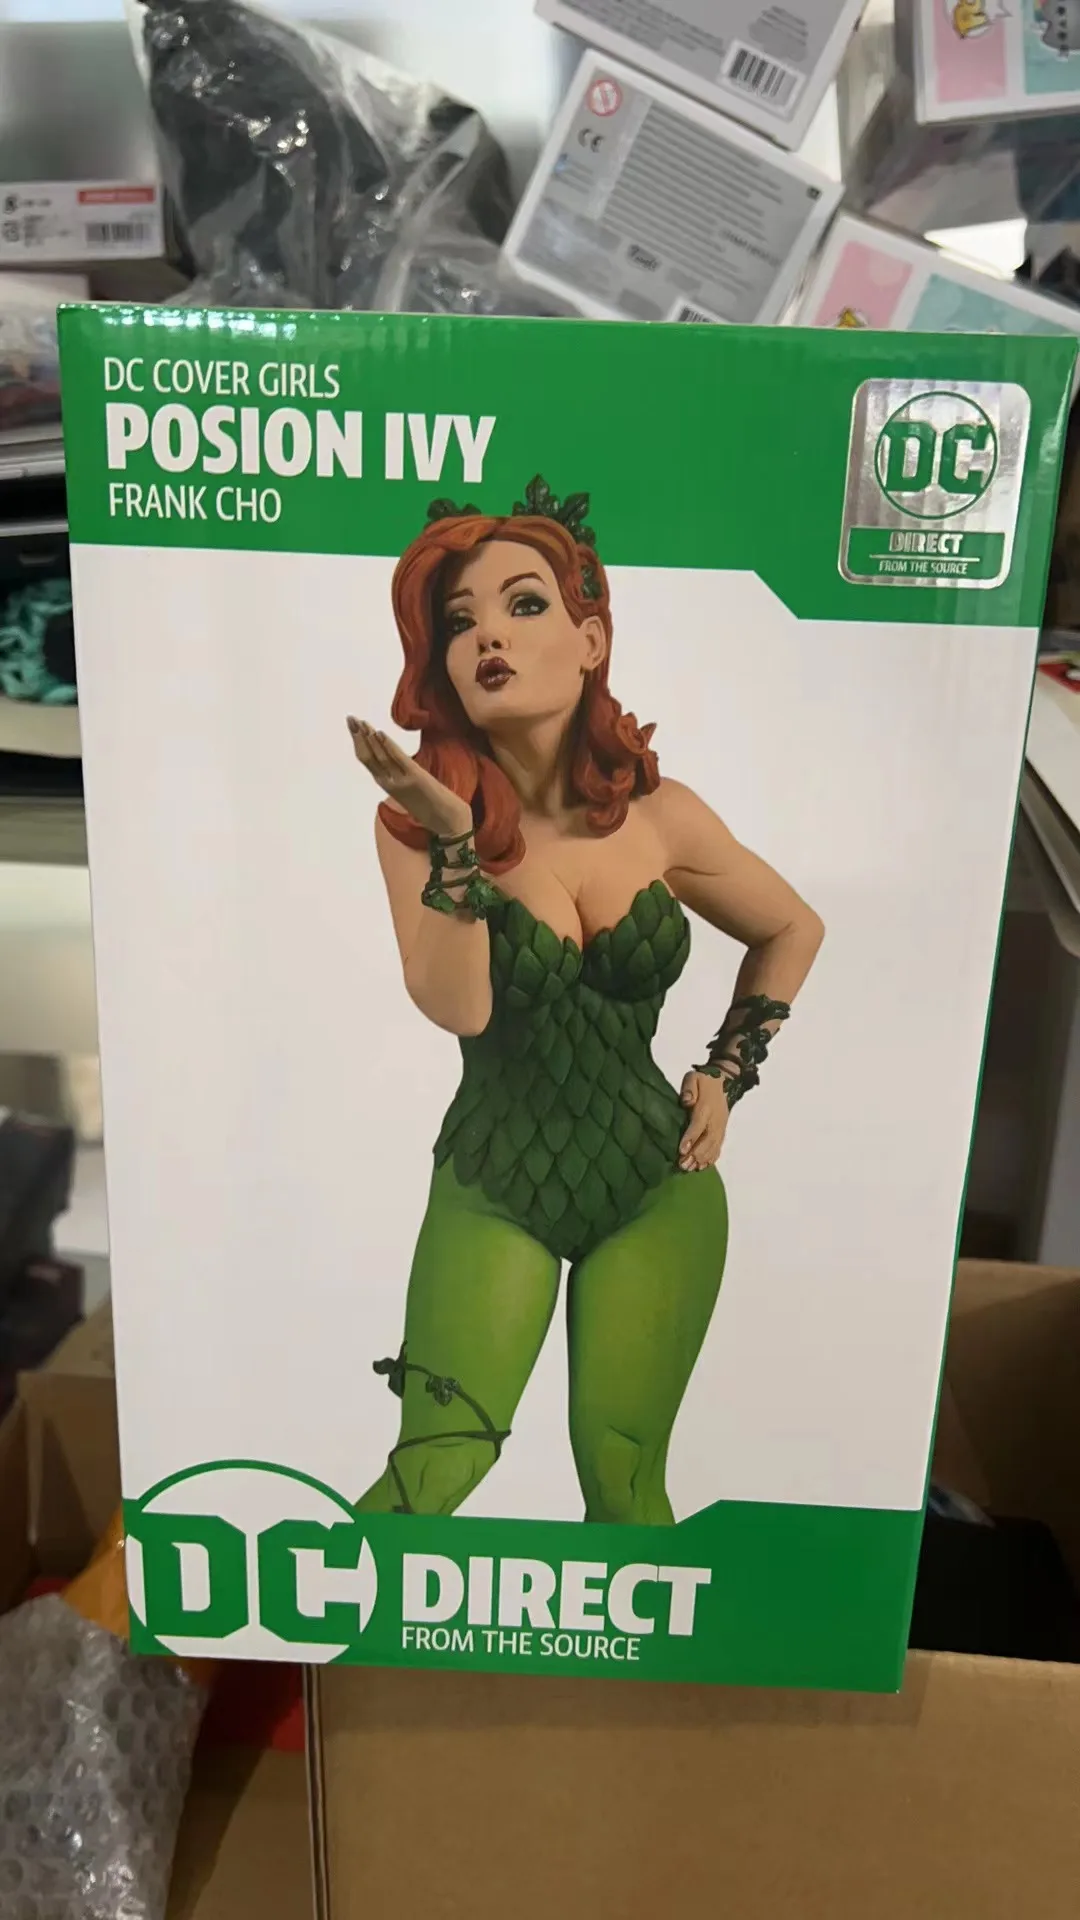 

Limit Sell McFarlane High Quality Resin DC Direct DC COVERGIRLS - Poison Ivy by Frank CHO Statue Figure Model Toys 8 Inch